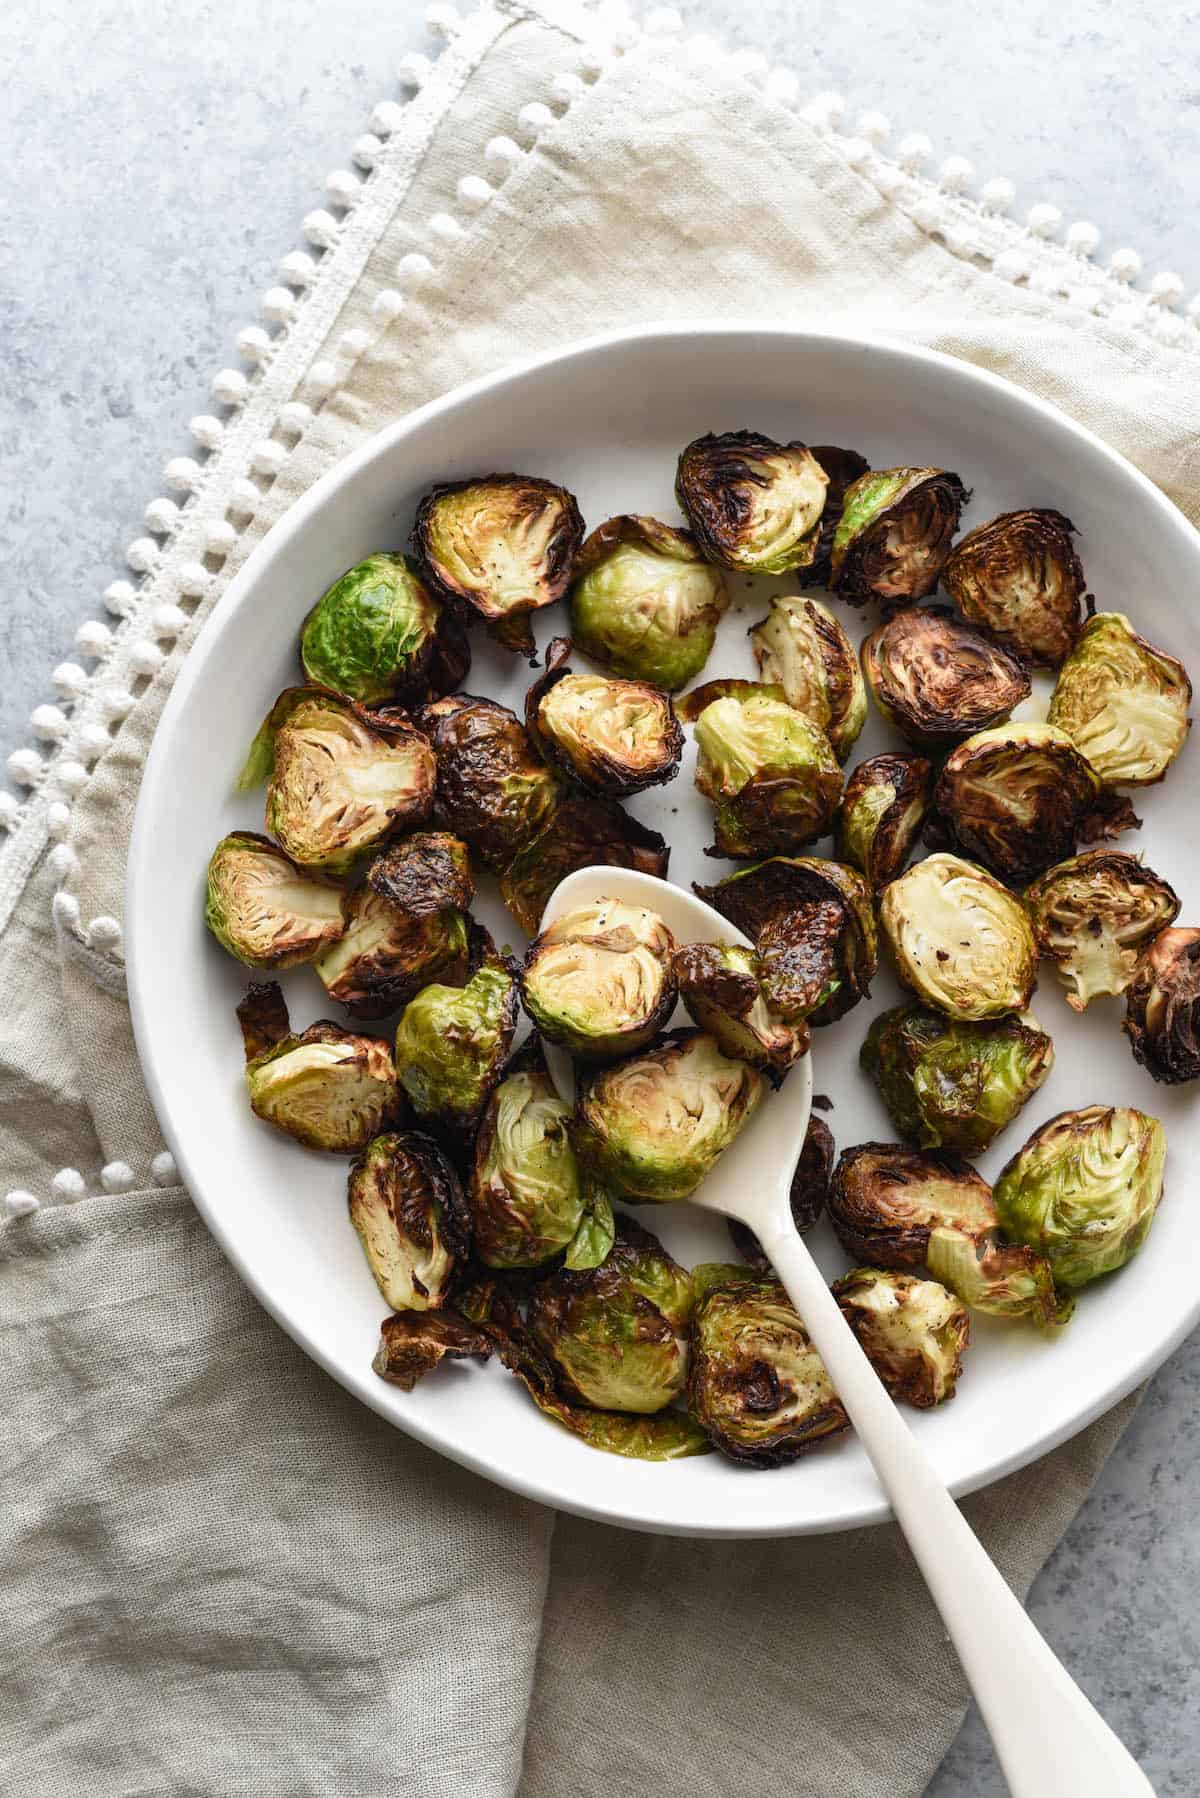 Air fry brussel sprouts in shallow white bowl with white serving spoon, on top of beige linen with pom pom edging.